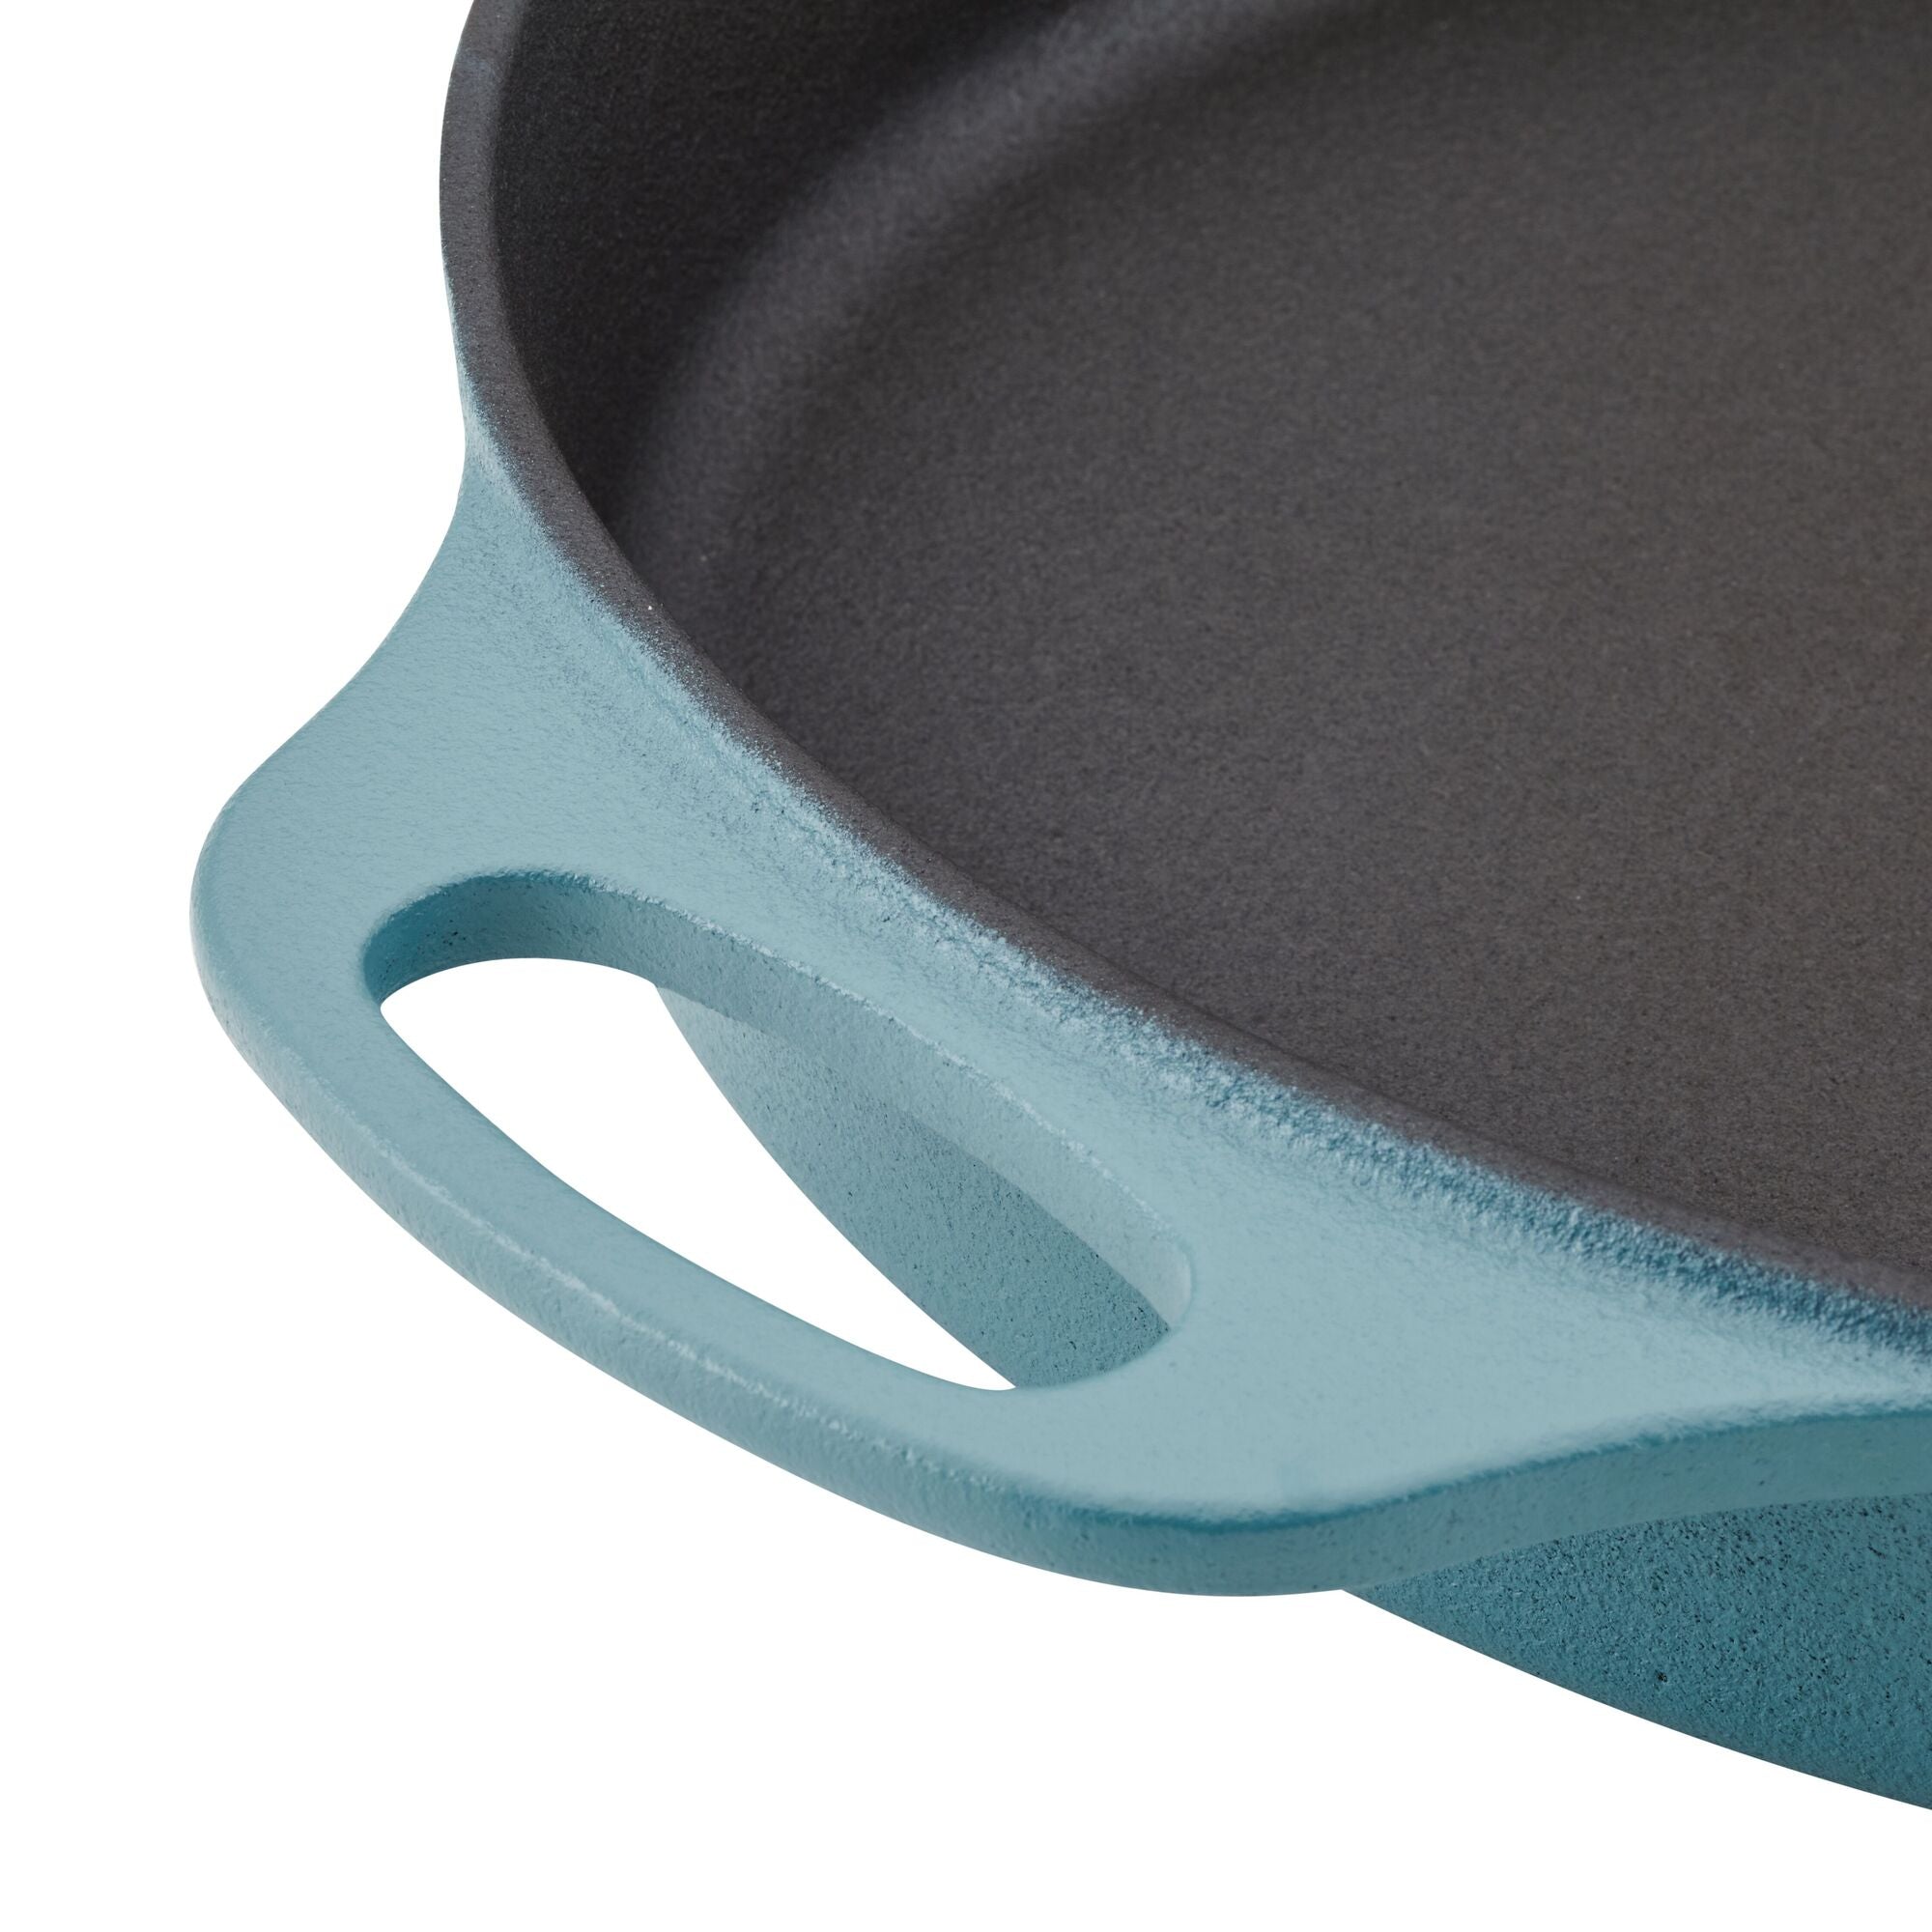 Rachael Ray NITRO Cast Iron Frying Pan/Skillet with Helper Handle and Pour  Spouts, 12 Inch, Almond